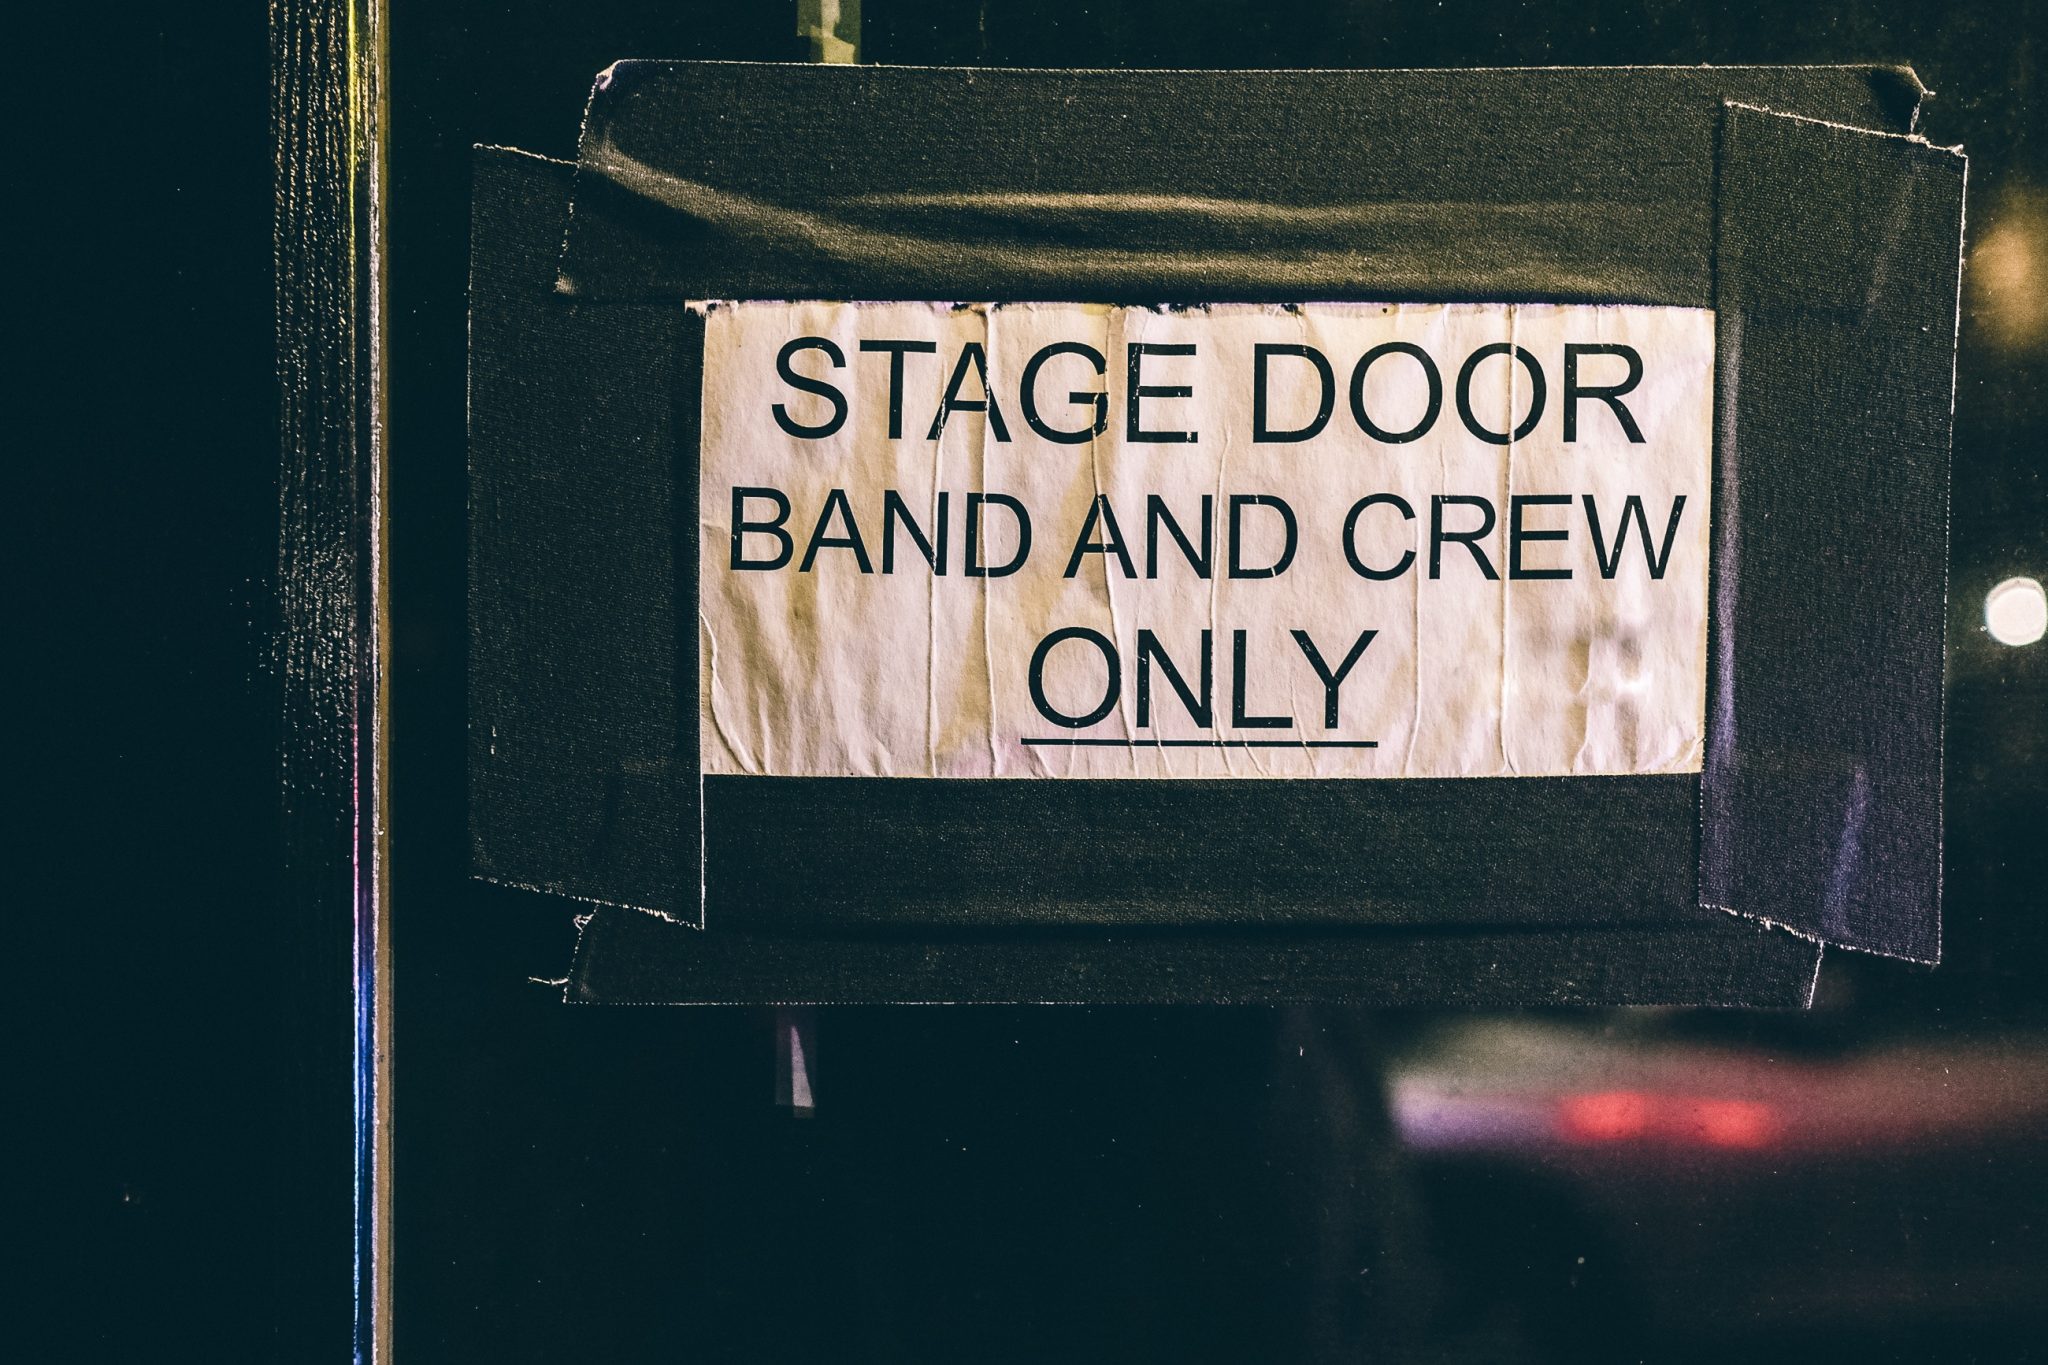 Image of stage door with sign